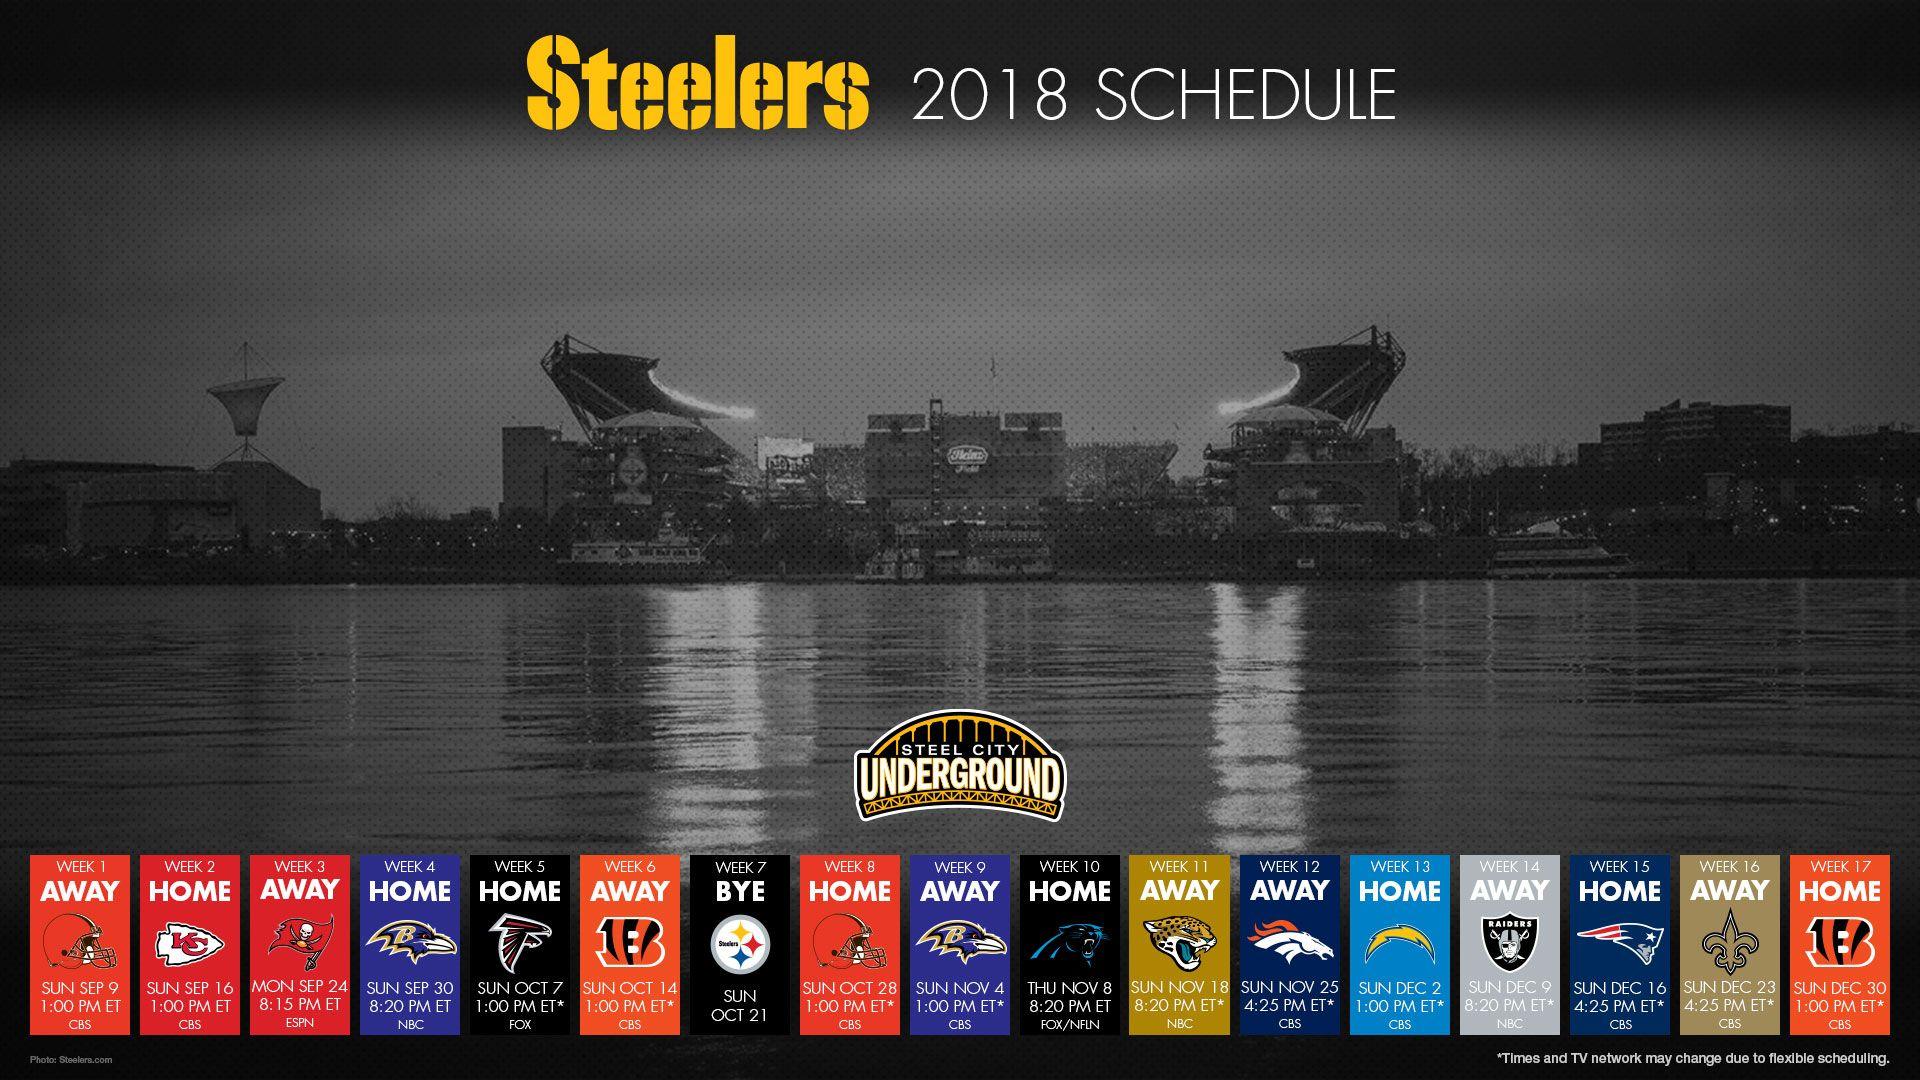 The Good, Bad and Ugly of the Steelers 2018 schedule. Steel City